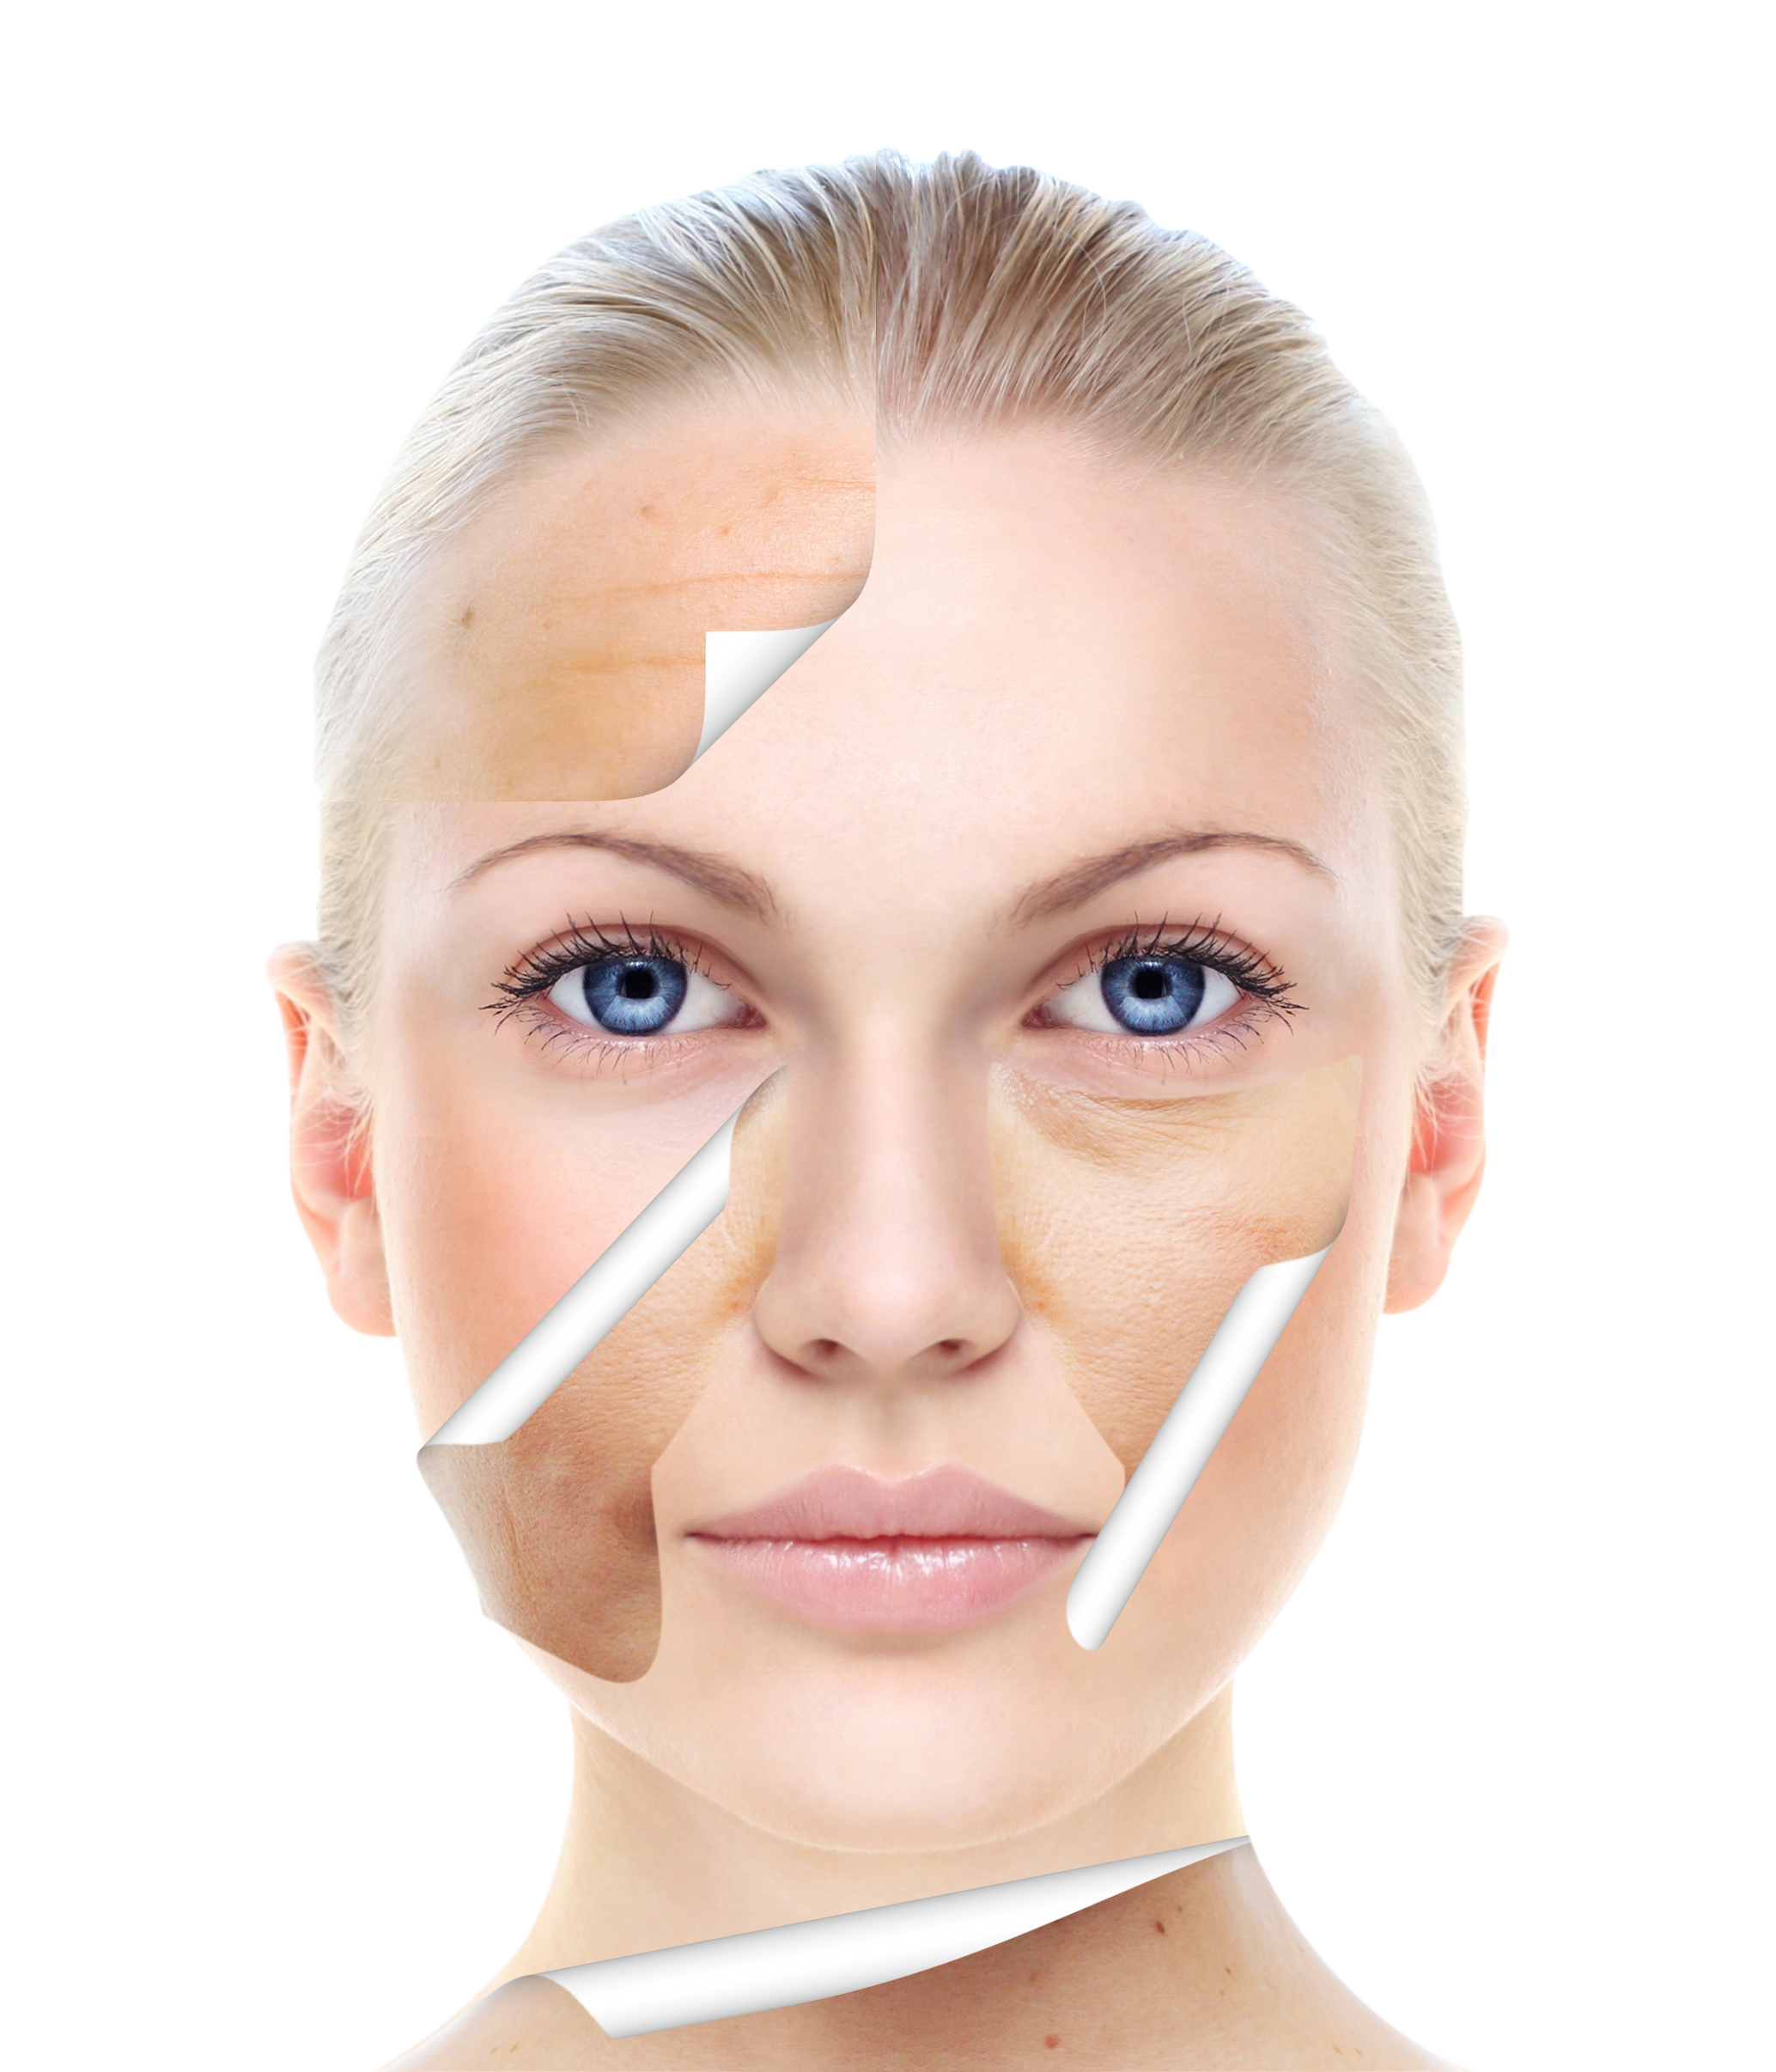 Head Beauty Up Skin Close Care PNG Image